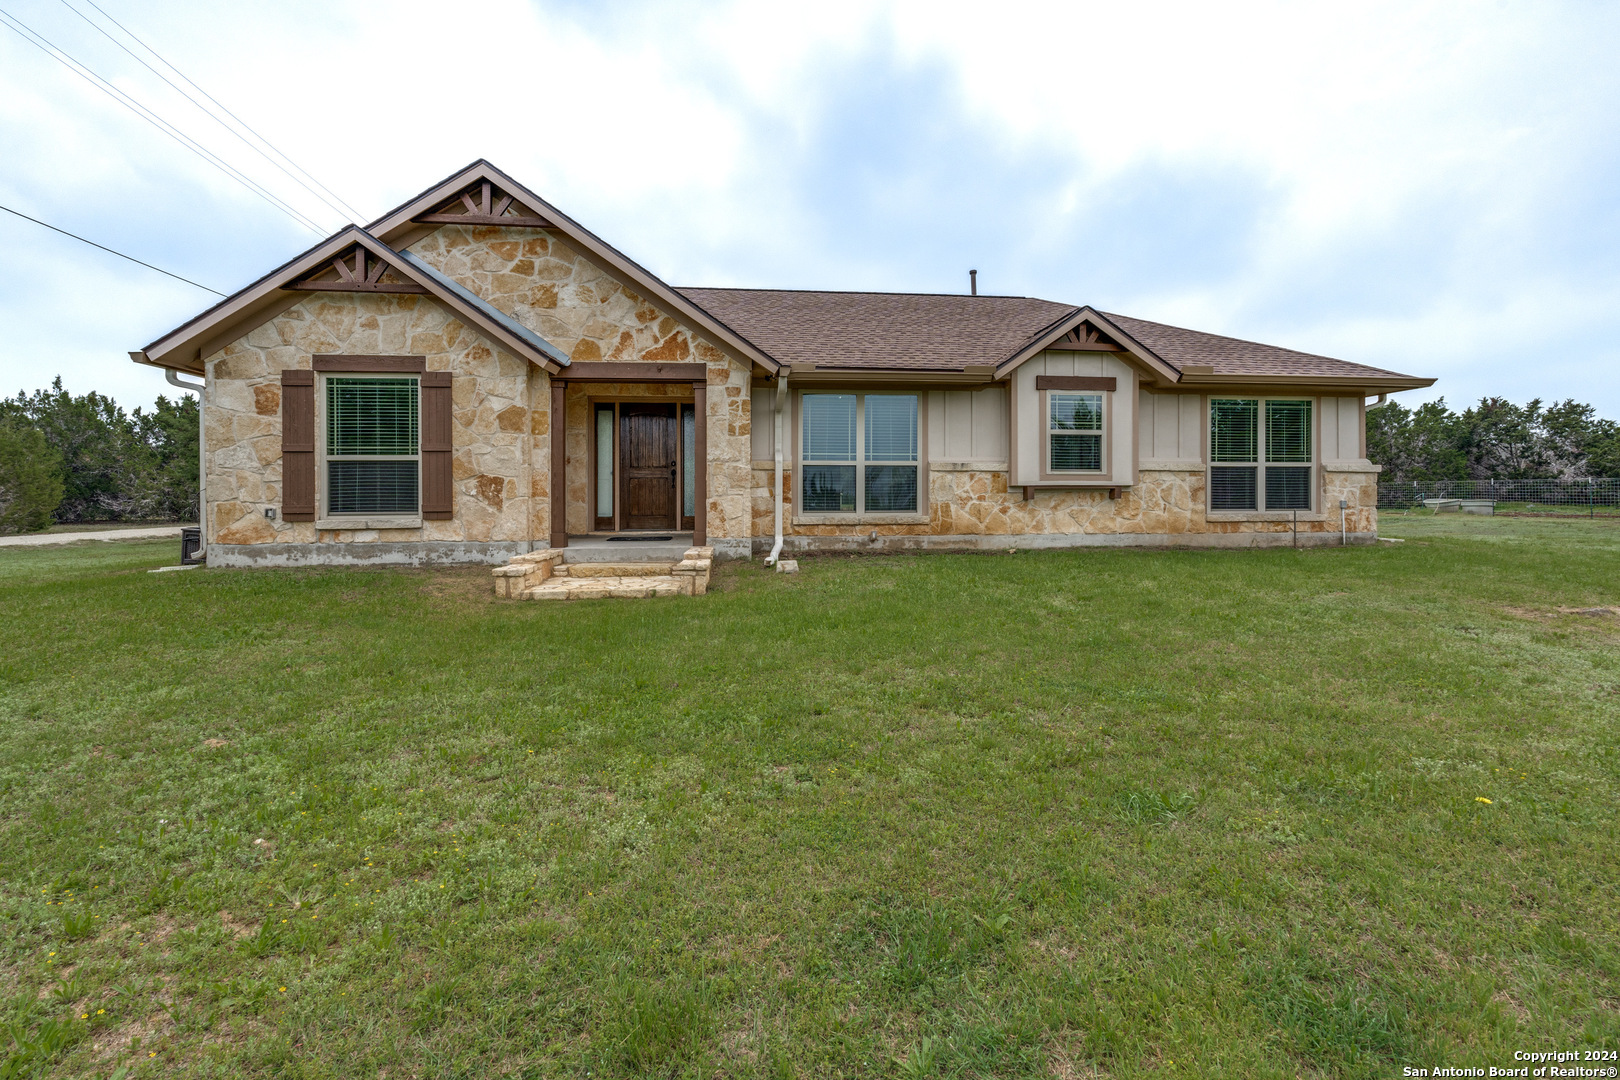 Photo of 198 Whitmire Dr in Blanco, TX